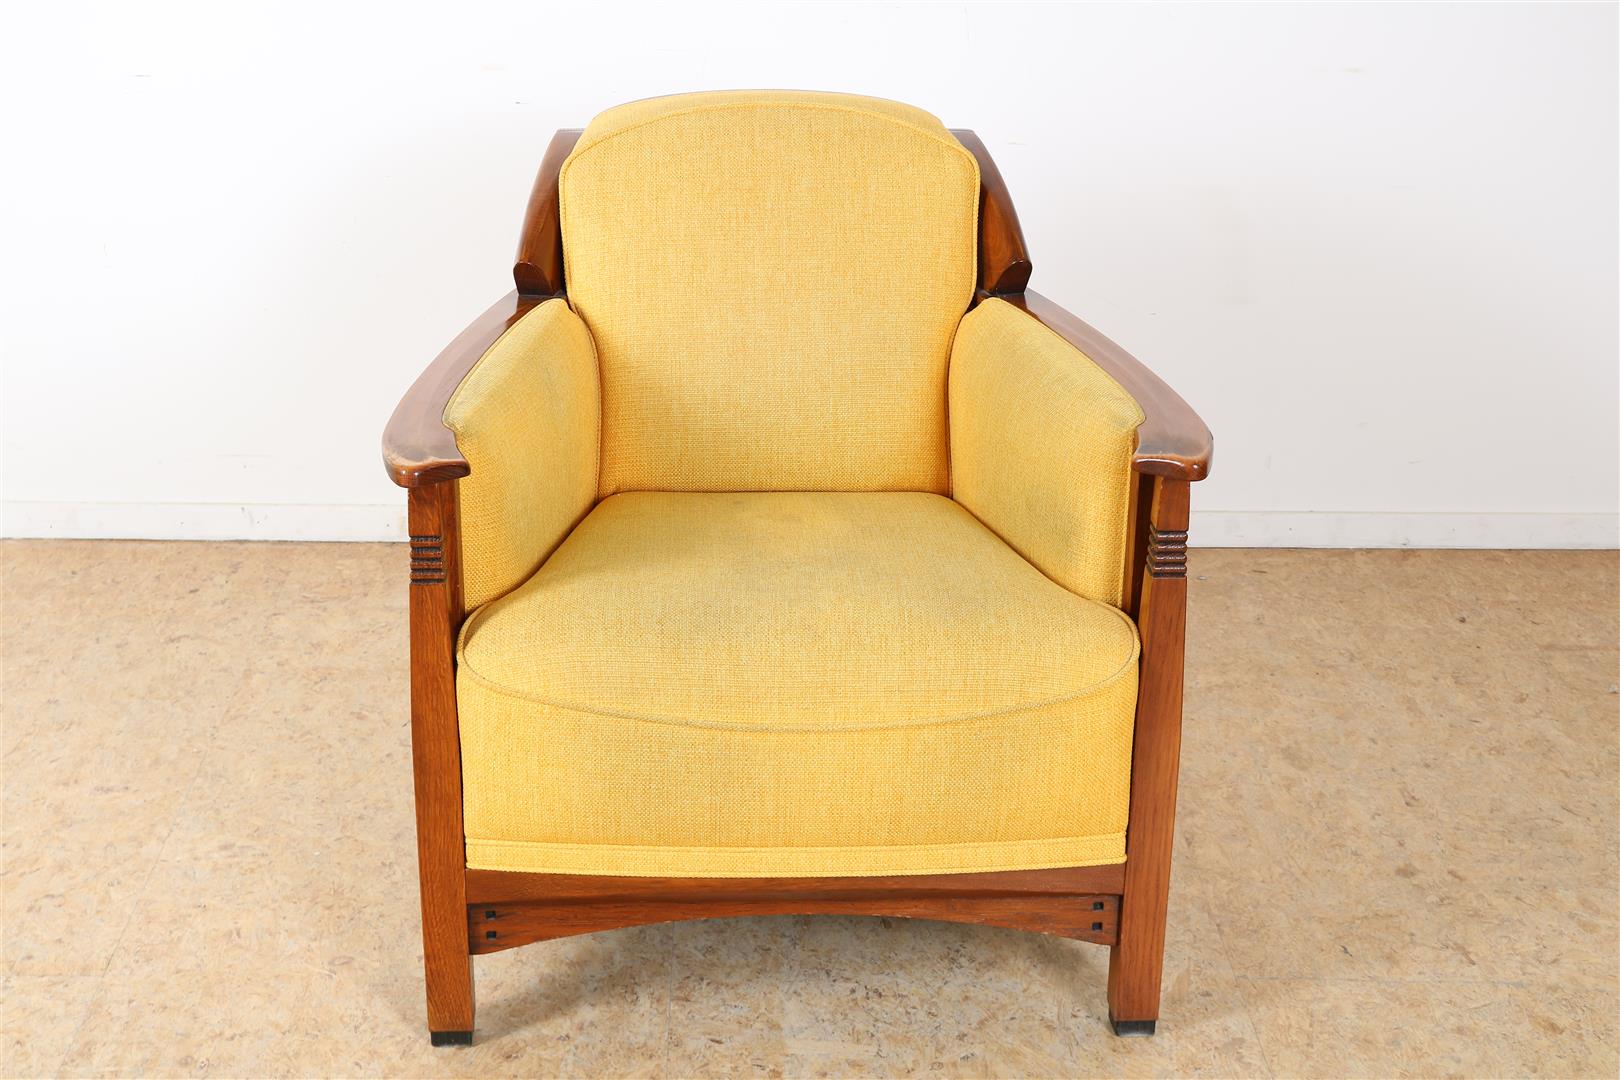 Oak Schuitema armchair with ocher yellow fabric upholstery (signs of use)